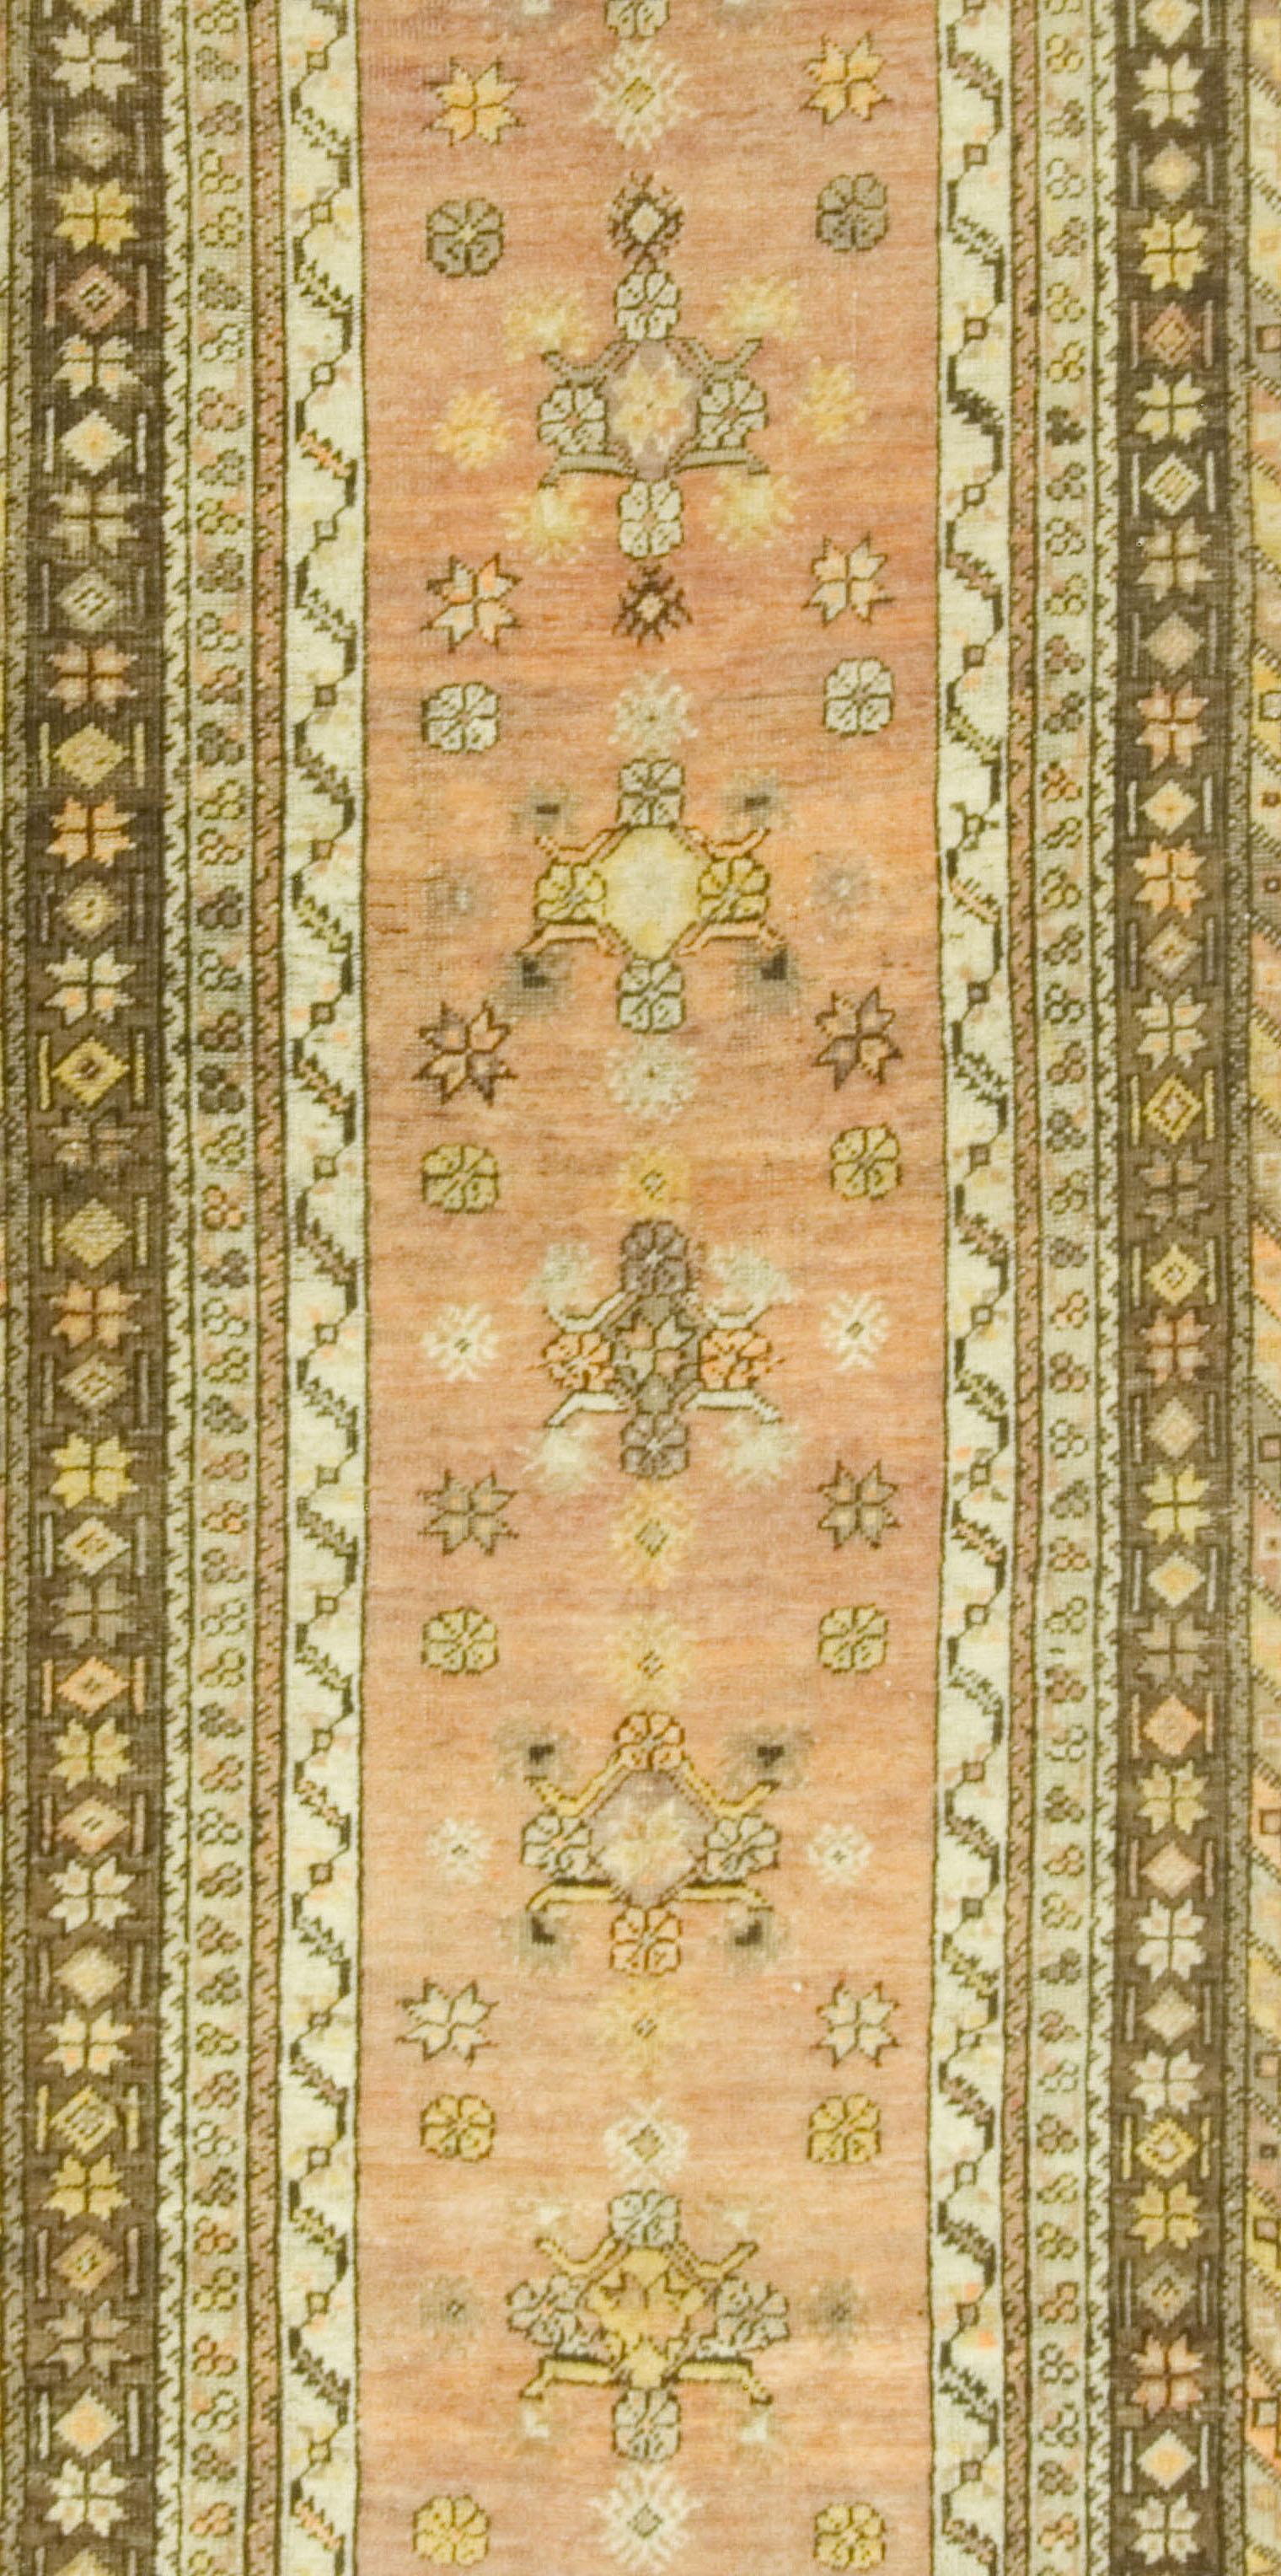 Hand-woven in Turkey where rug weaving is the culture rather than a business. Rugs from Turkey are known for the high quality of their wool their beautiful patterns and warm colors. These designer favorites will complement any interior. Colors: